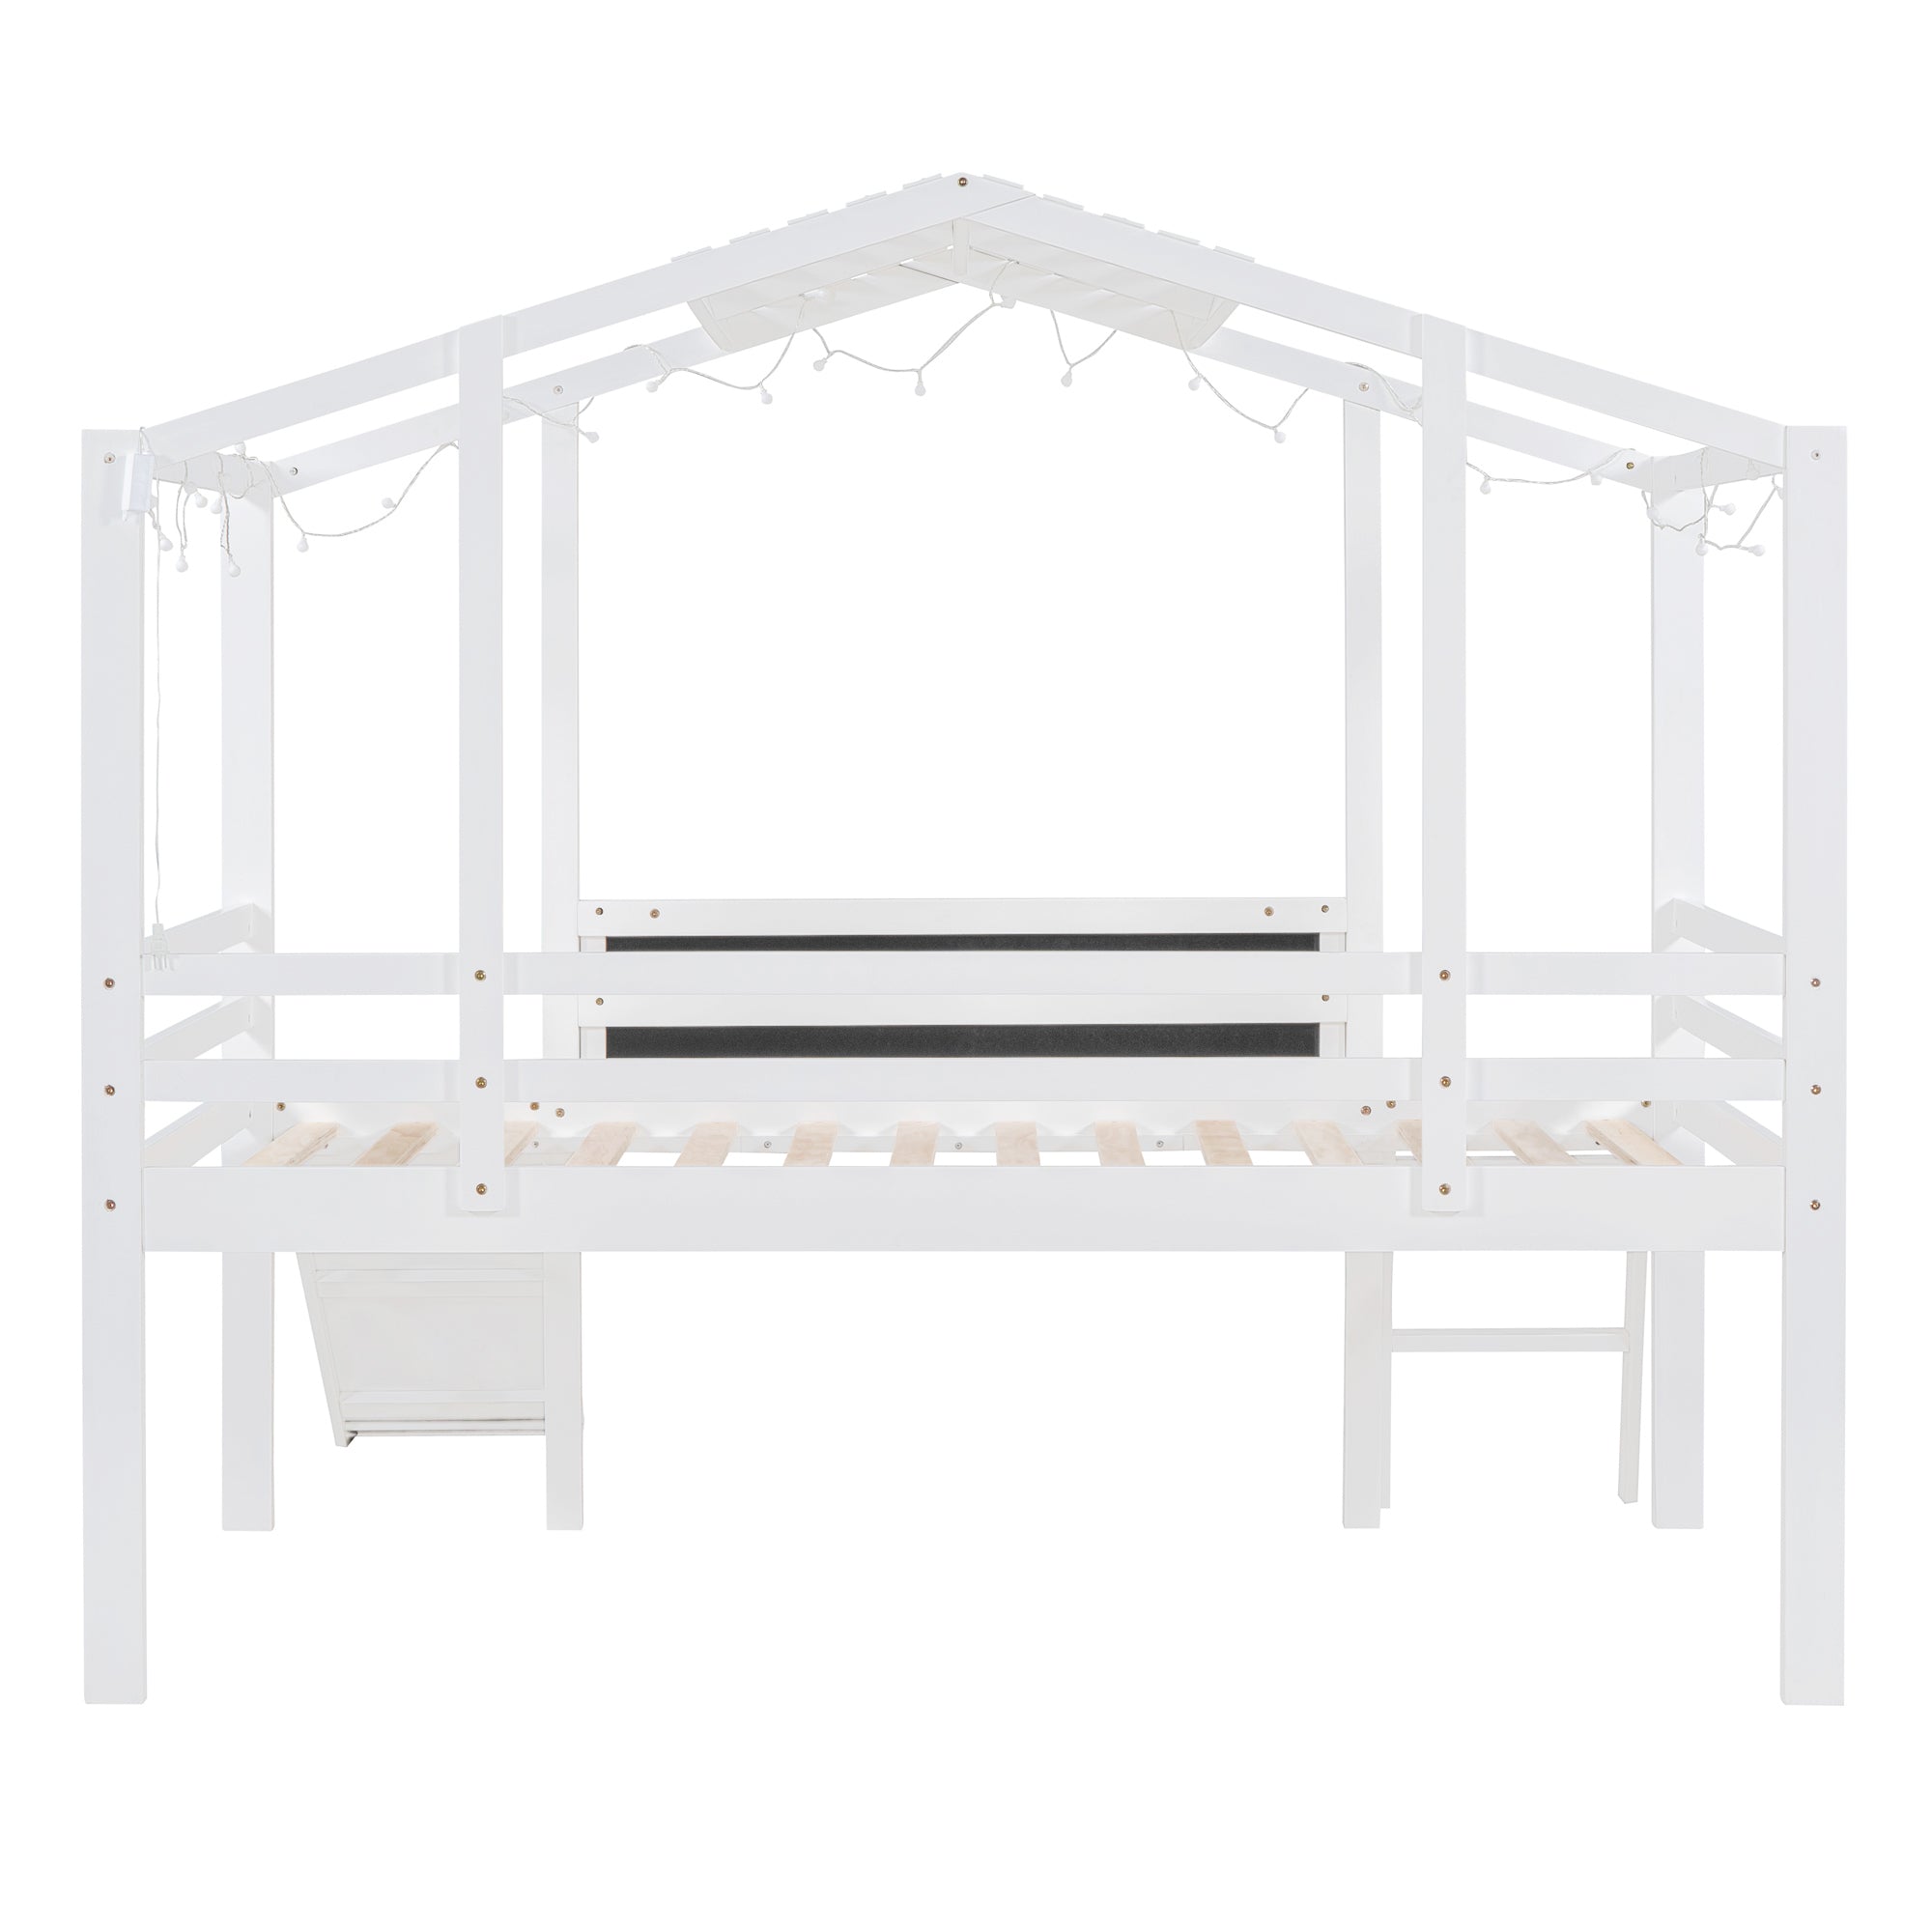 Bellemave Twin Size Loft Bed with Ladder and Slide, House Bed with Blackboard and Light Strip on the Roof